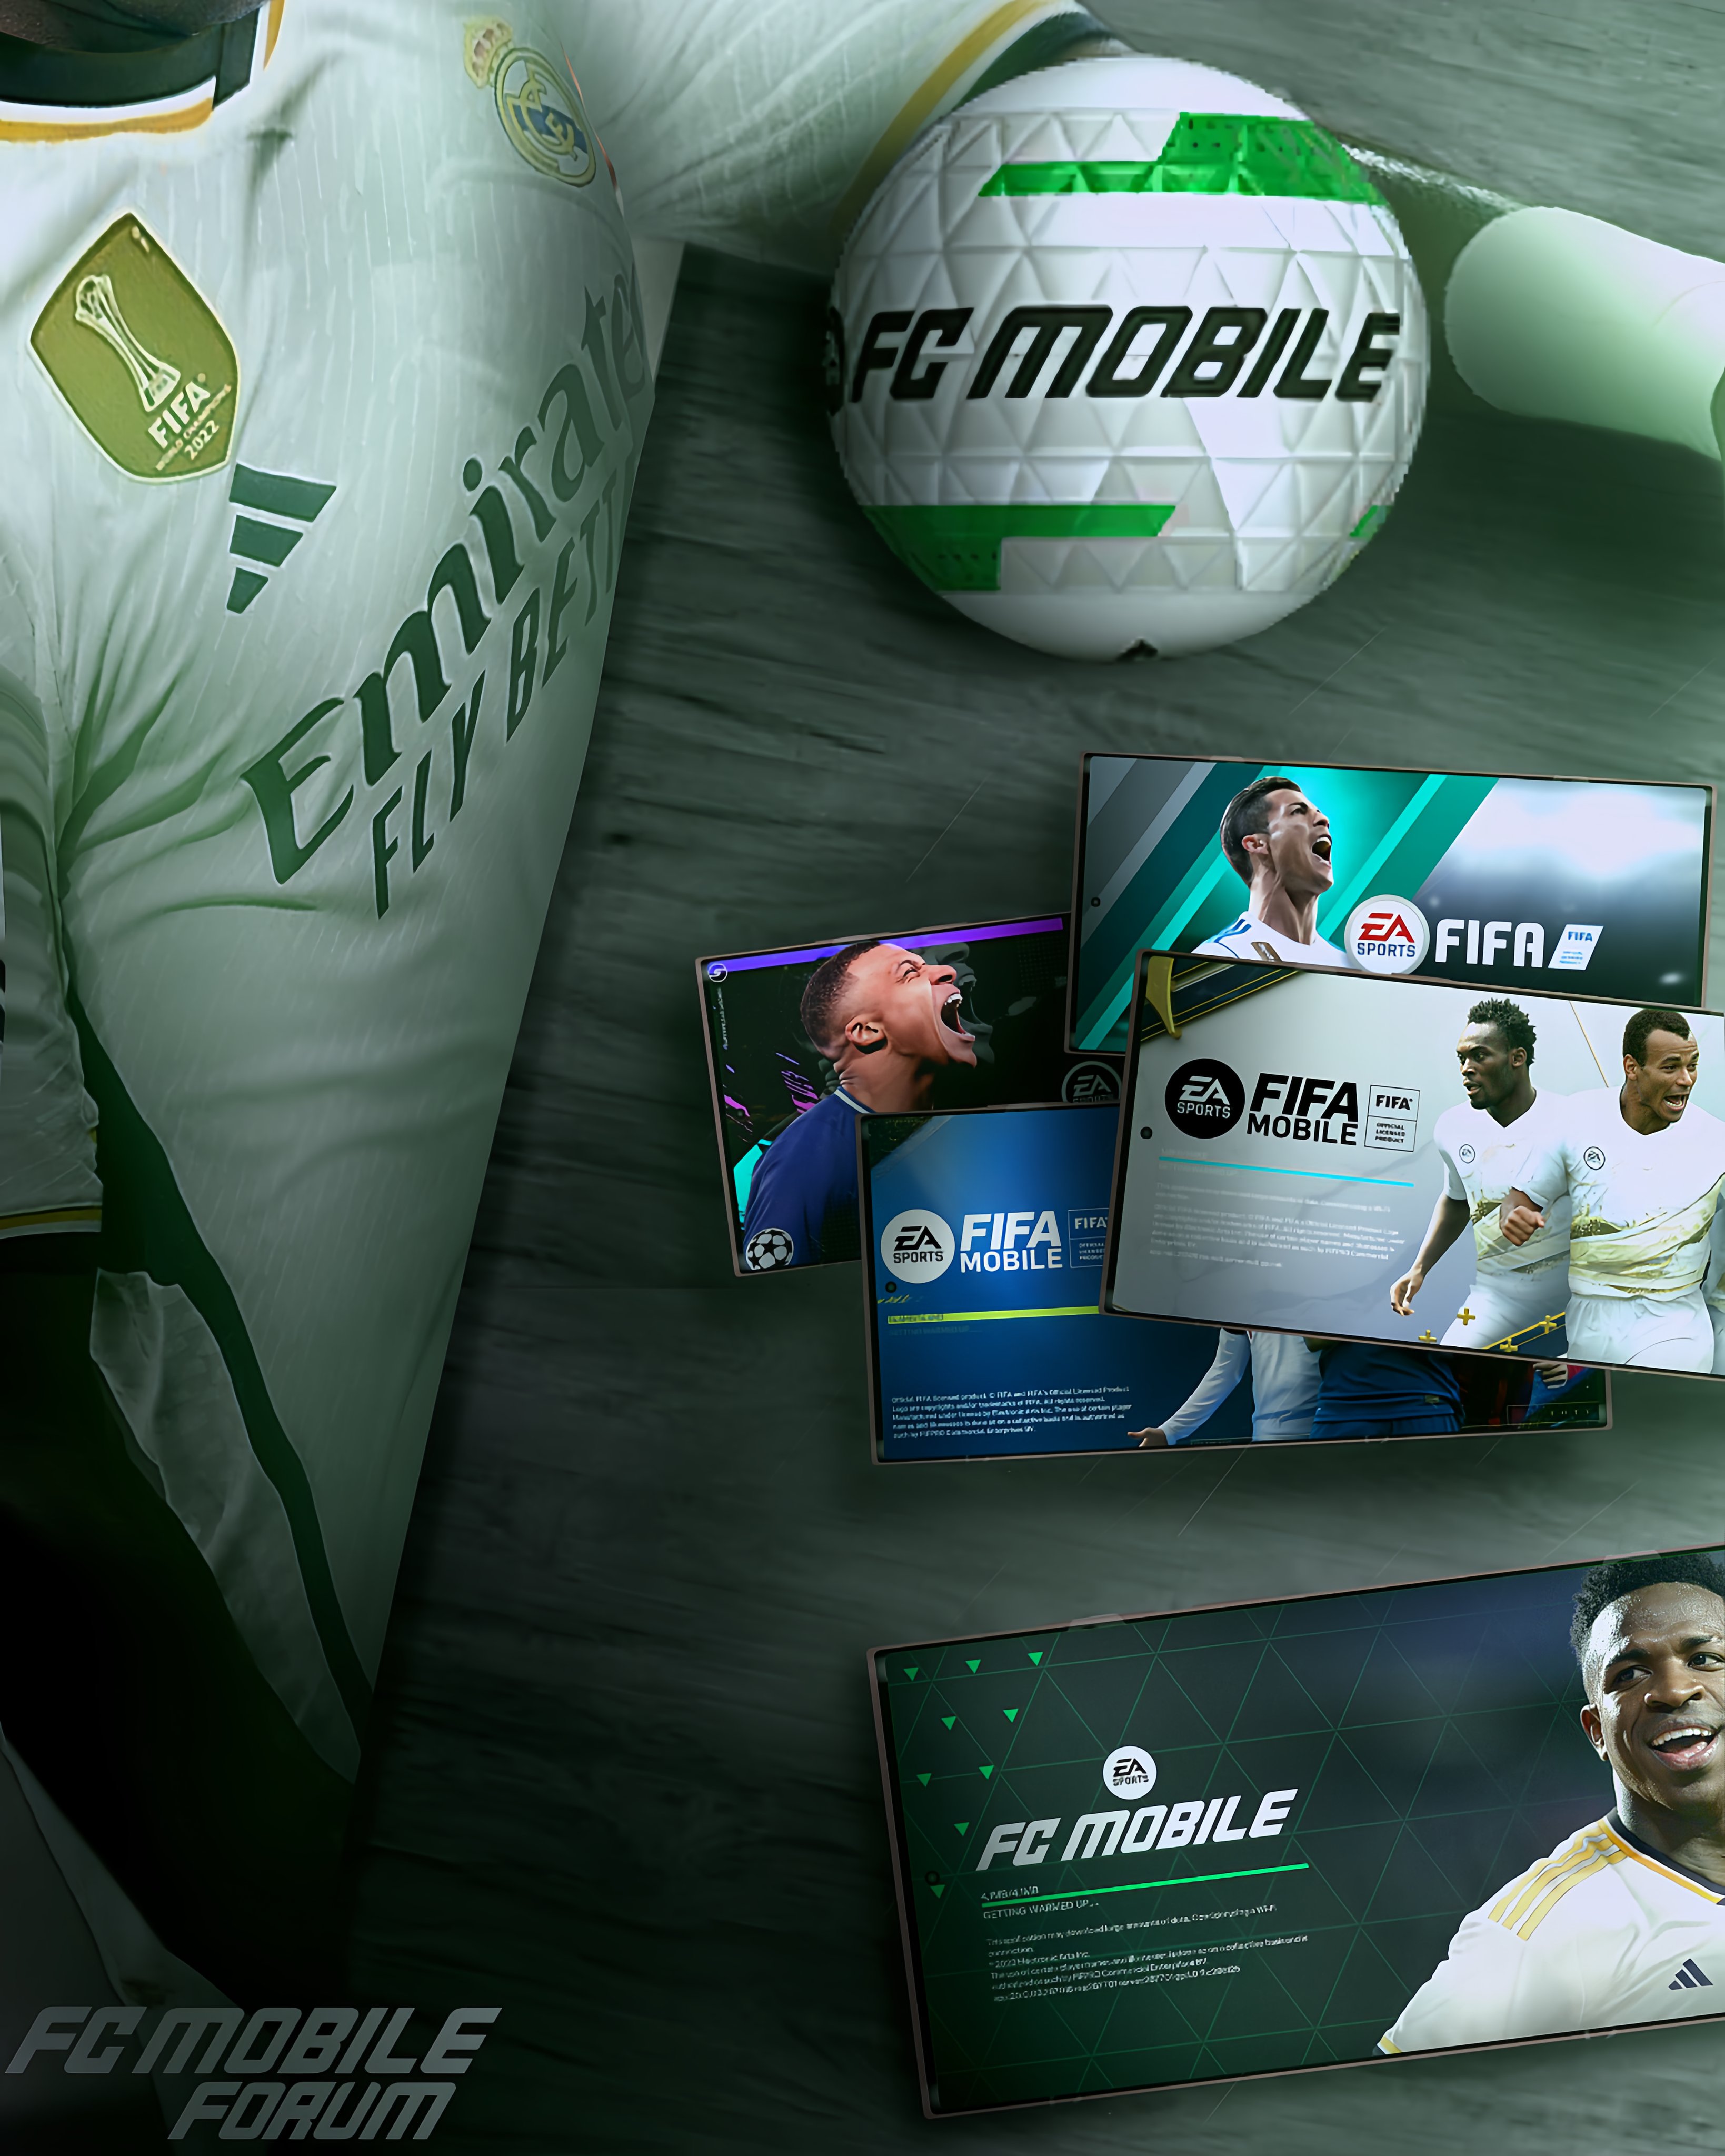 FIFA Mobile Soon to Turn Into FC Mobile With the Real Madrid Star on Its  Cover - EssentiallySports